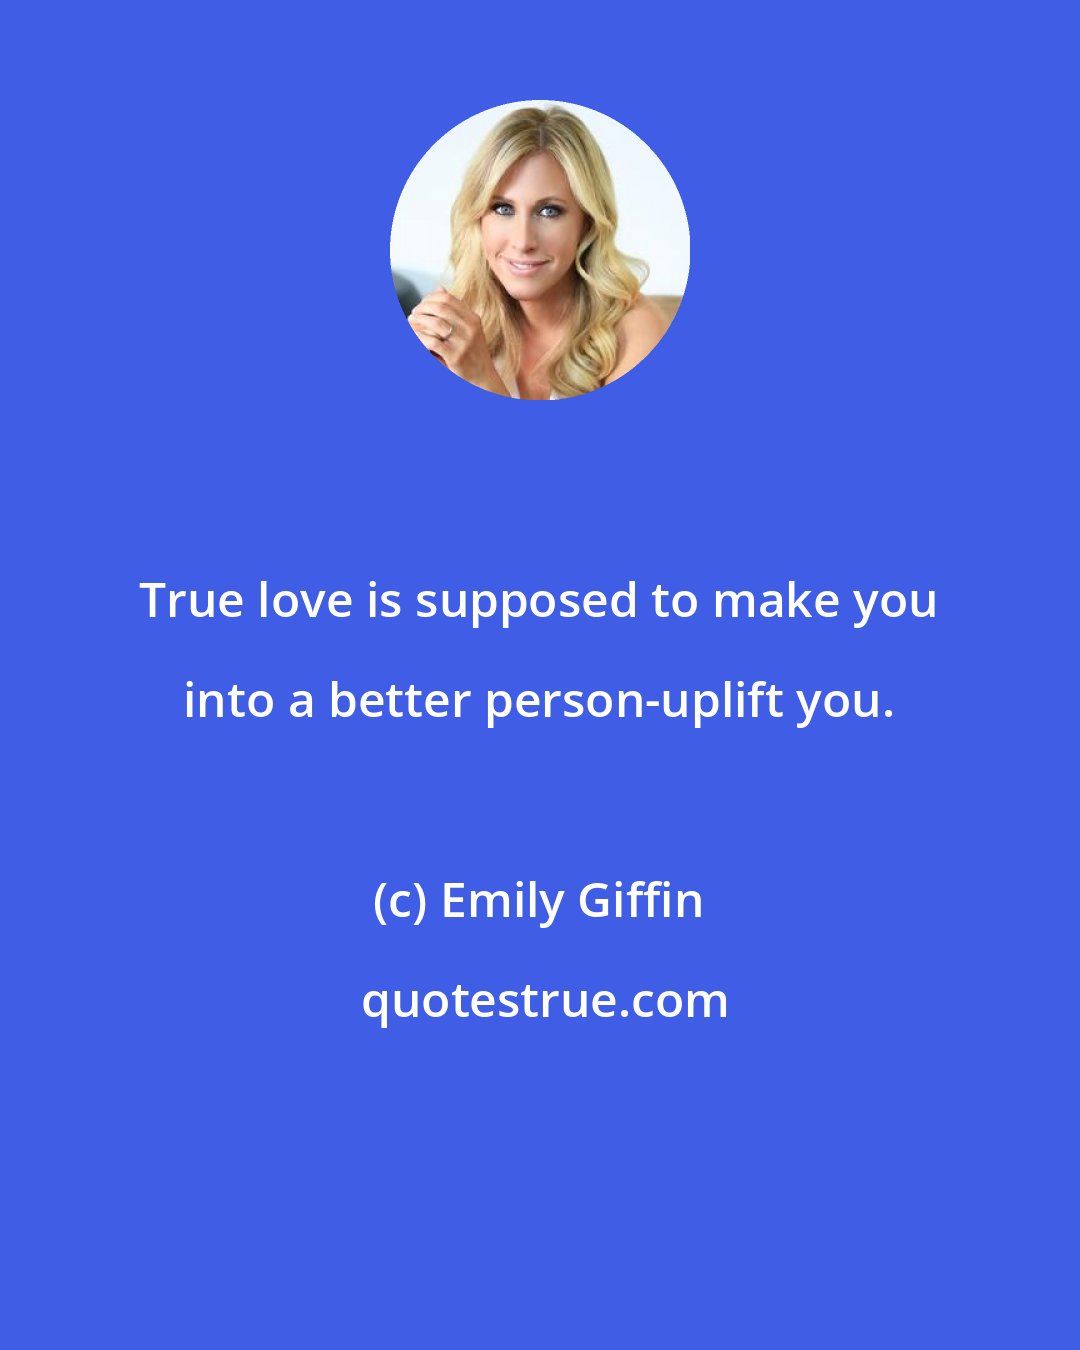 Emily Giffin: True love is supposed to make you into a better person-uplift you.